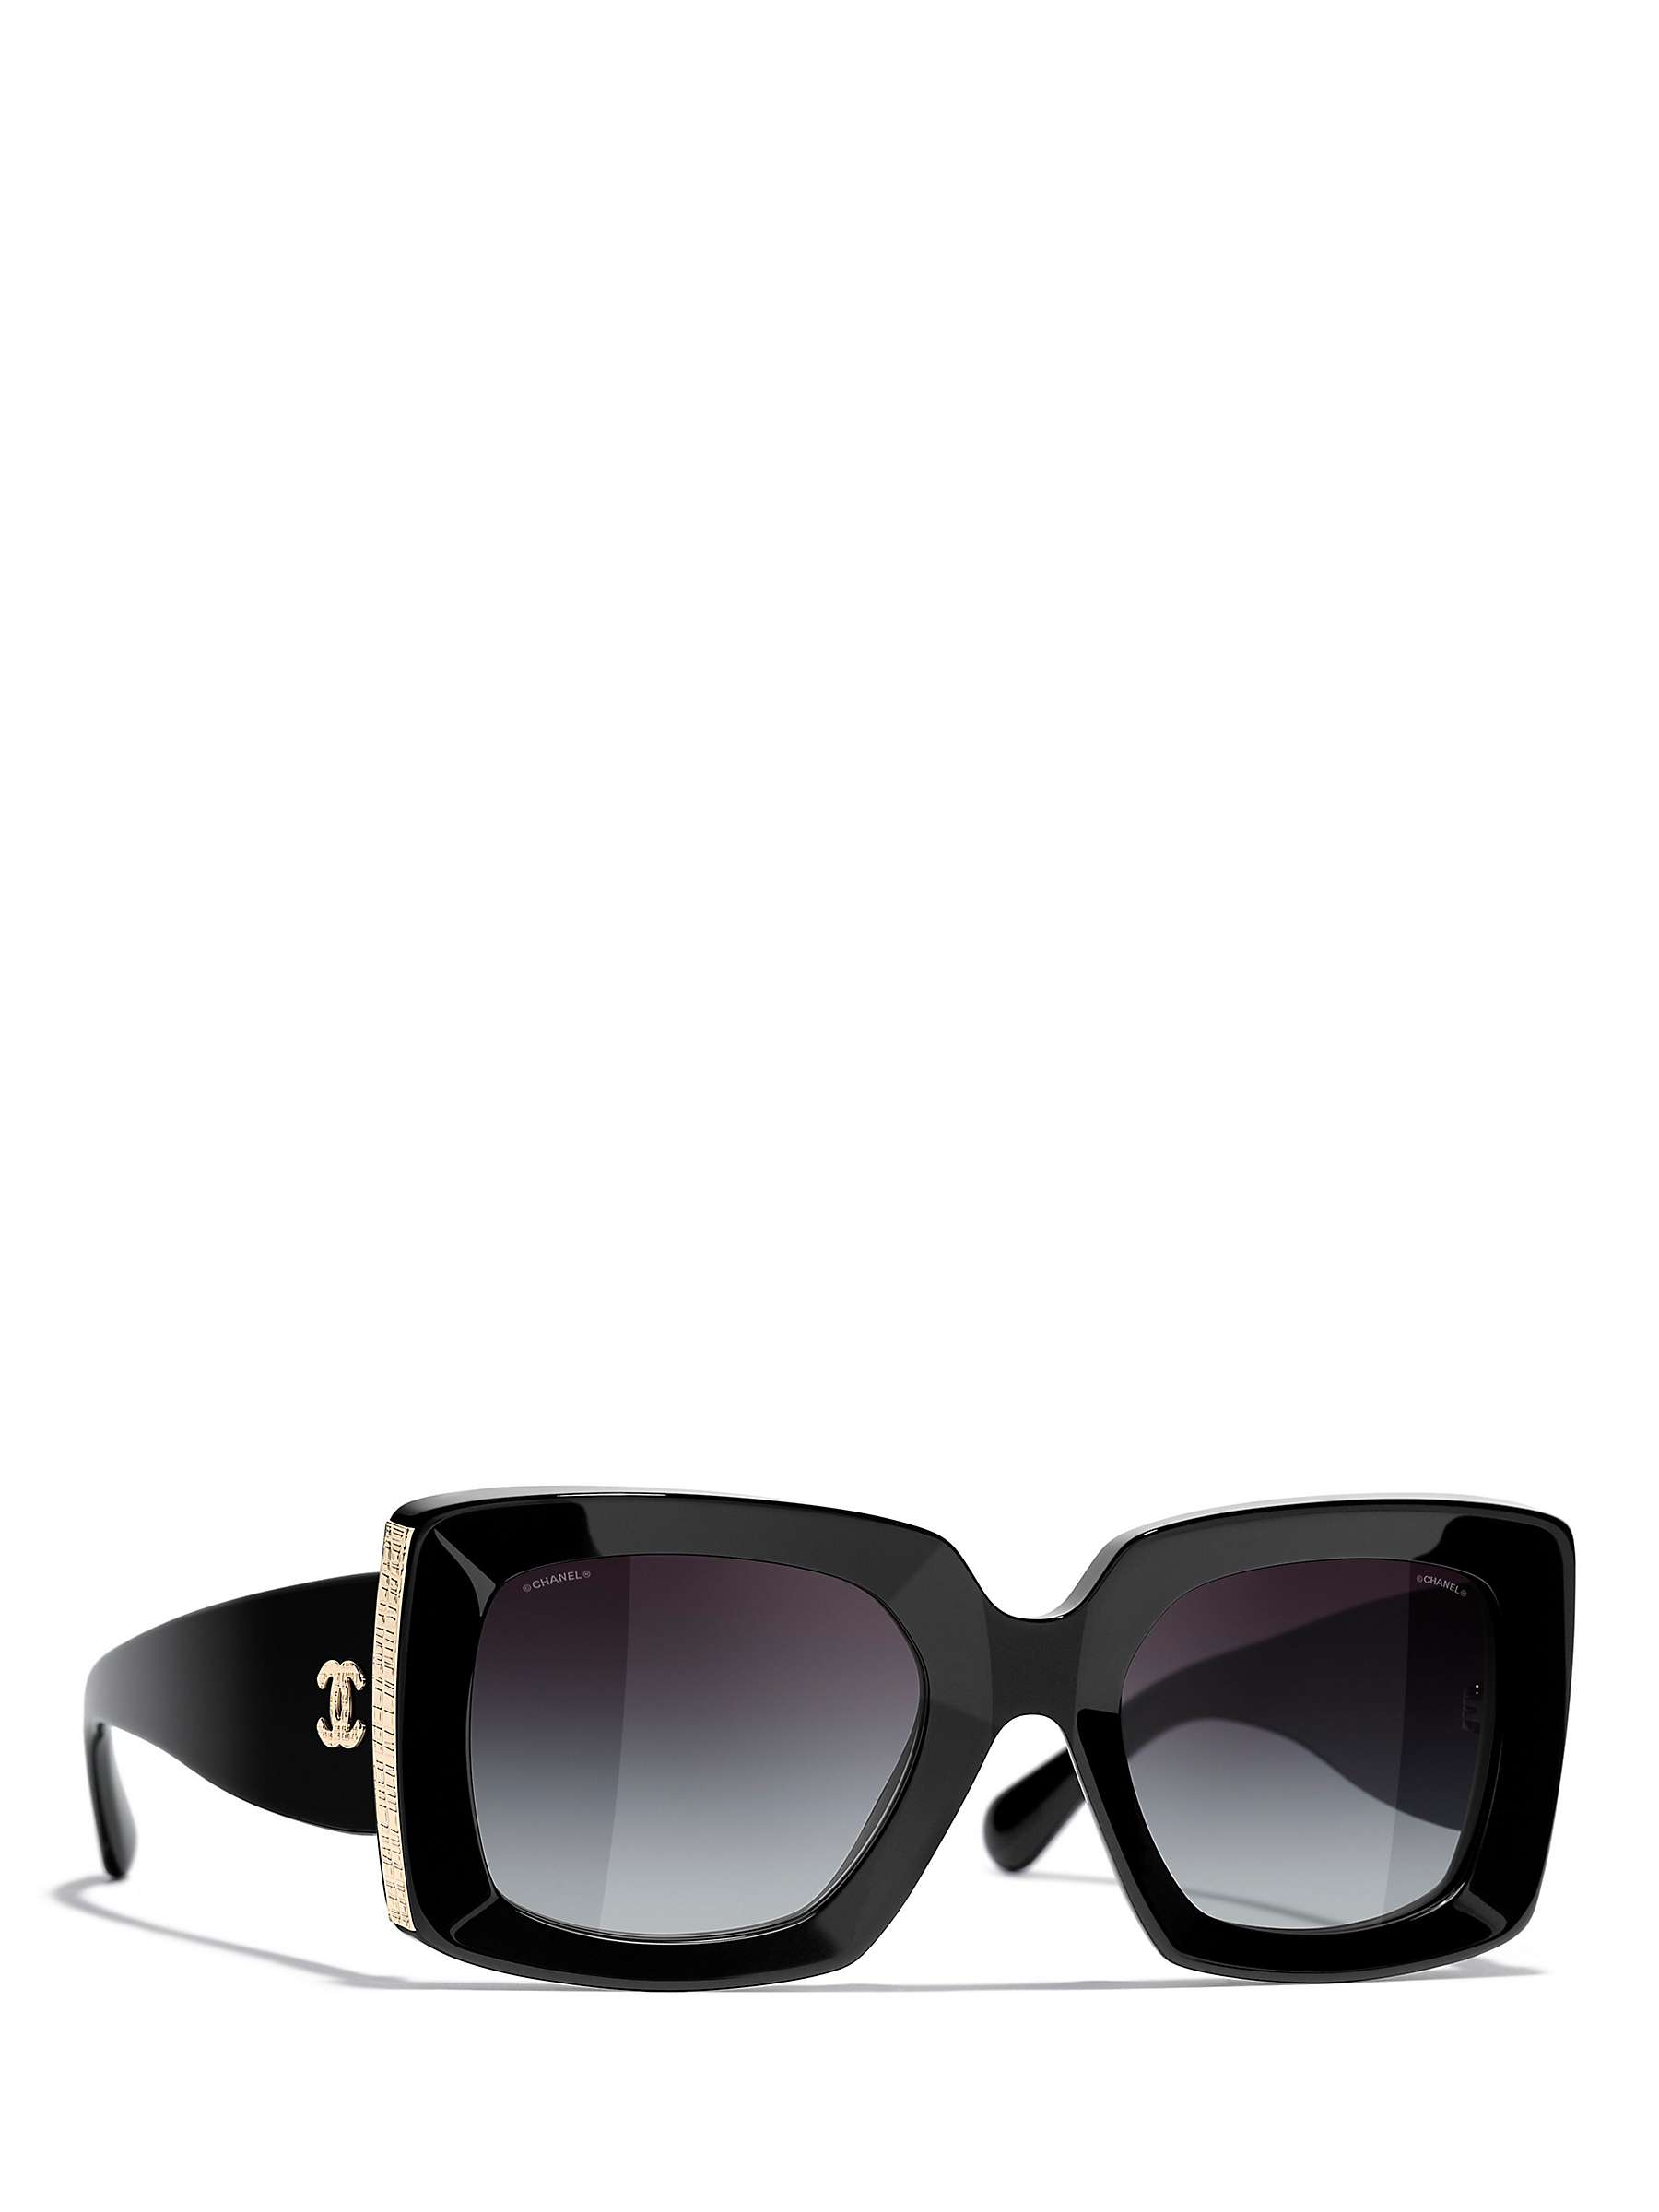 Buy CHANEL Square Sunglasses CH5435 Black Online at johnlewis.com